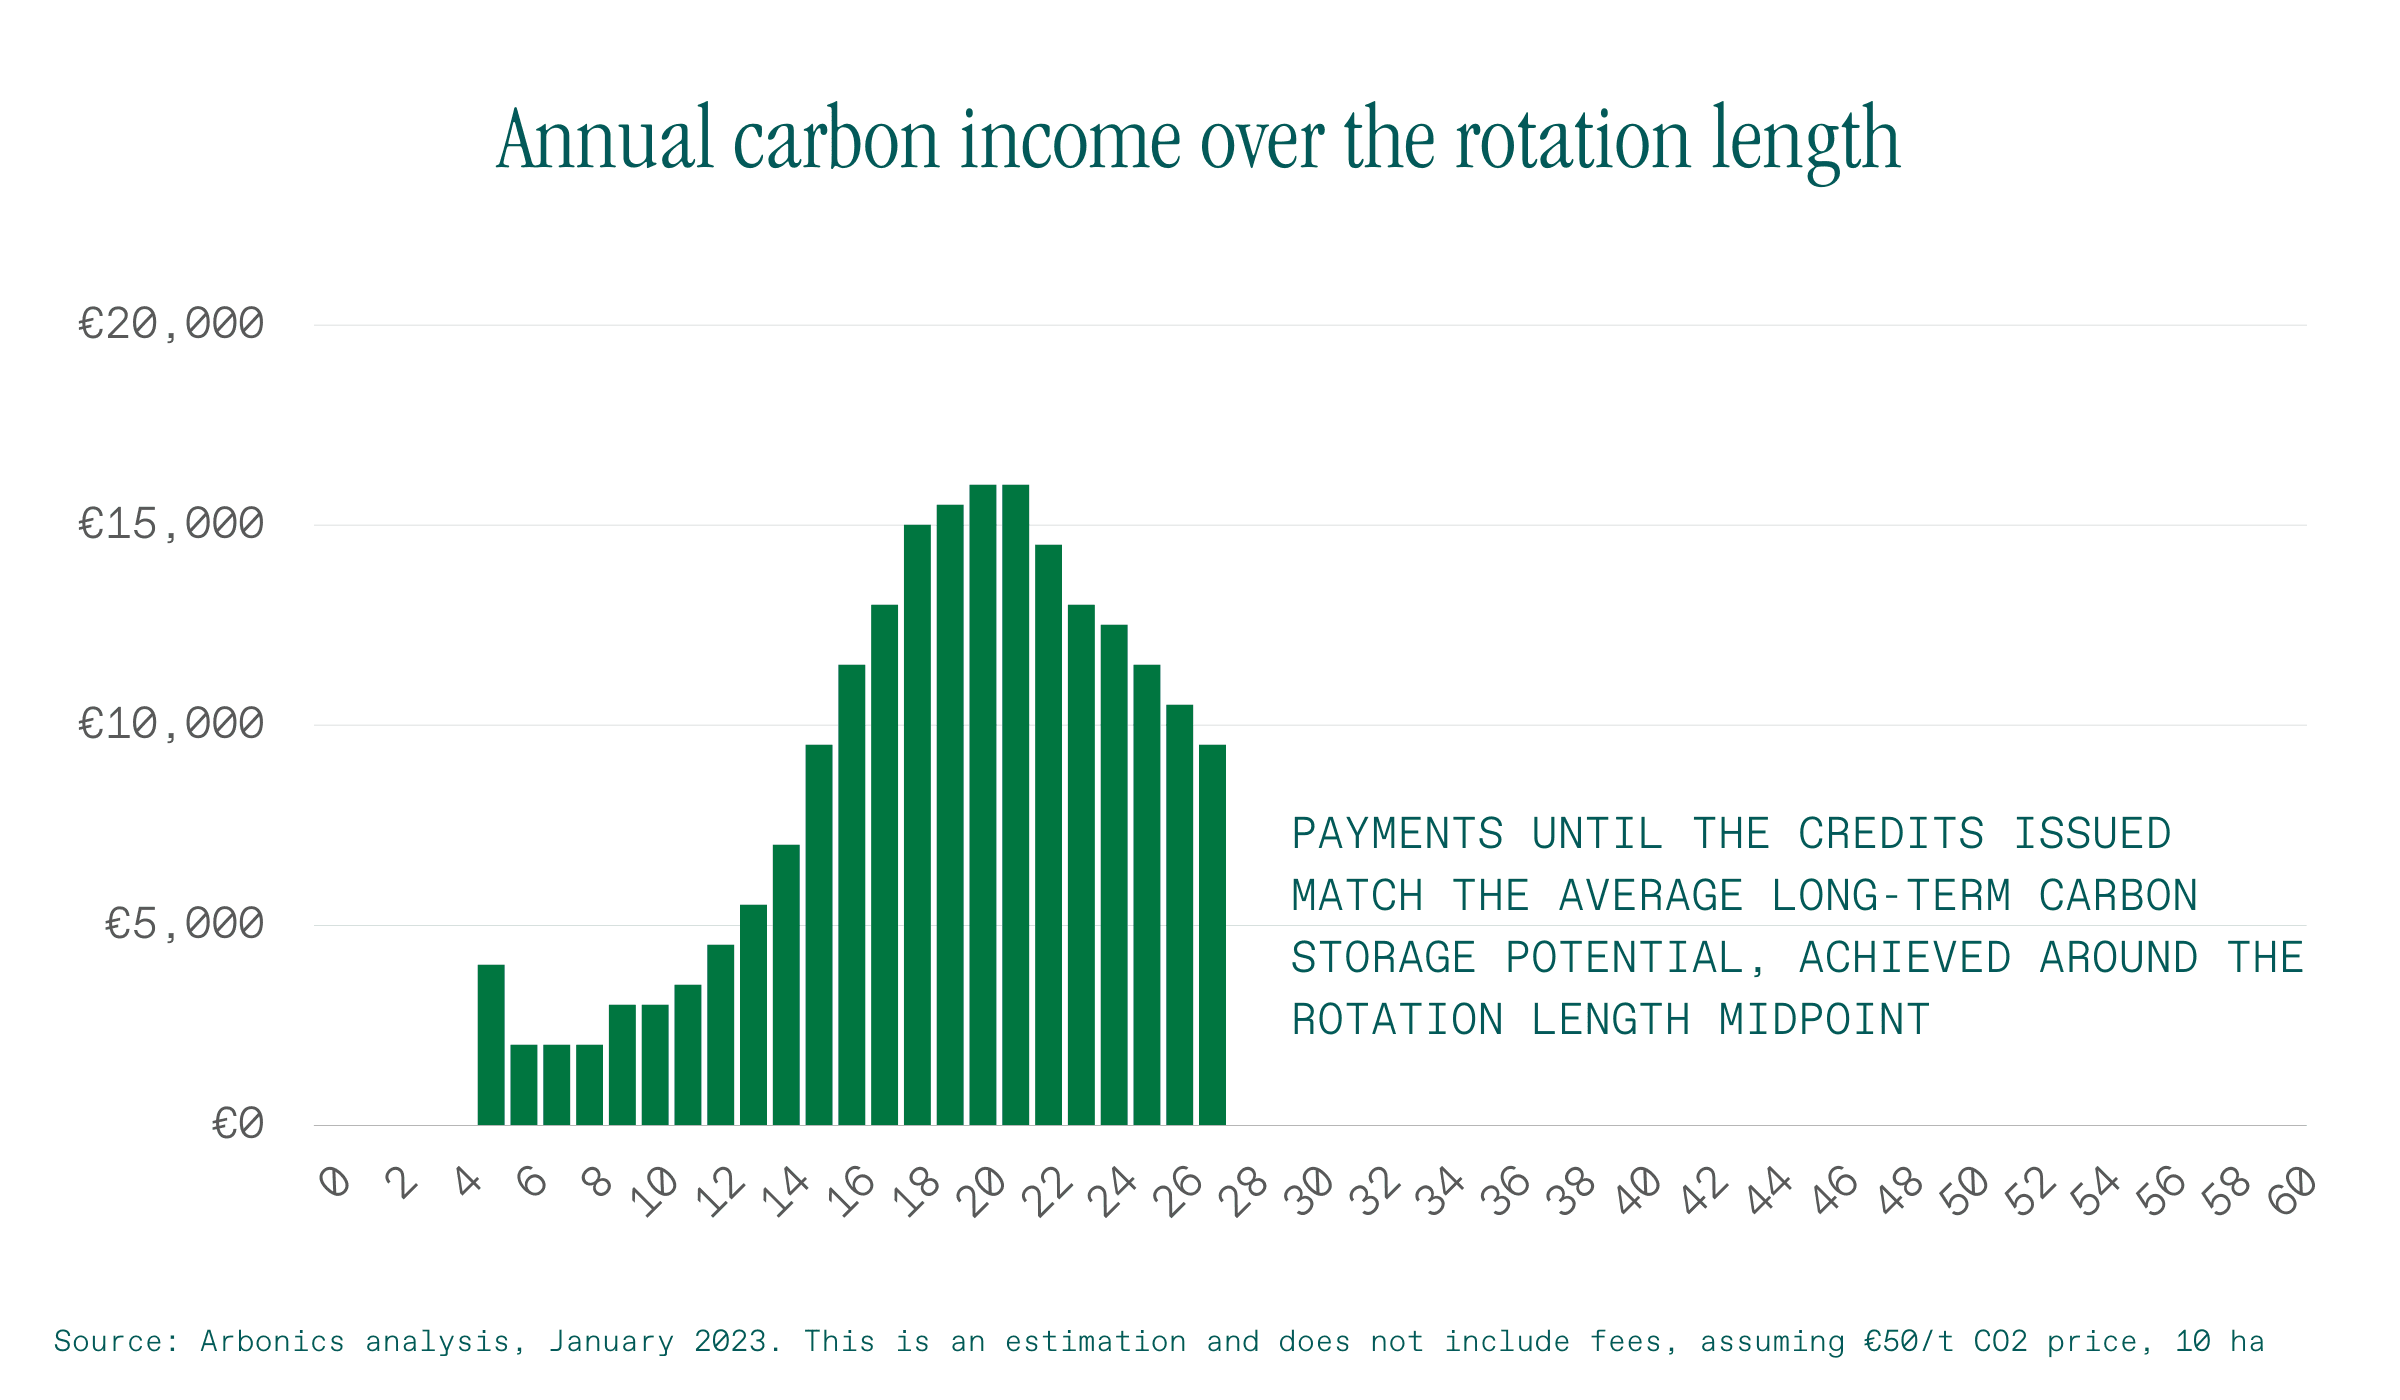 Annual carbon income over rotation length